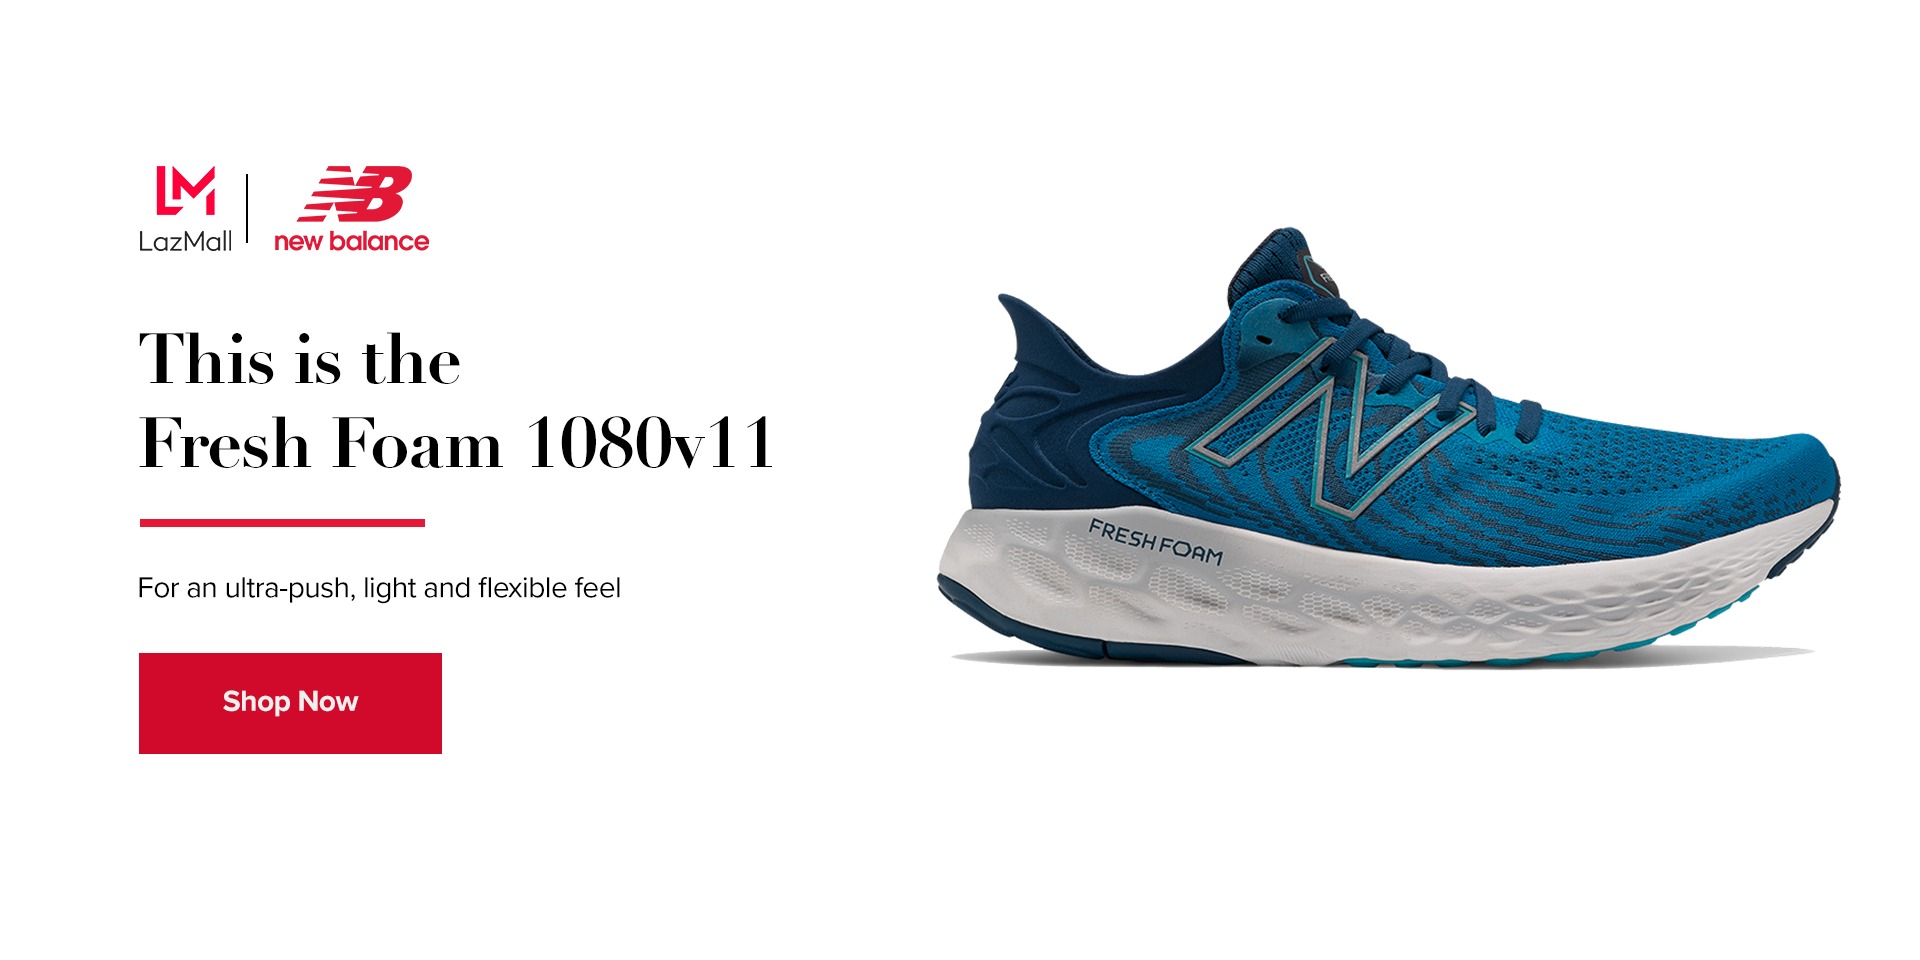 price of new balance shoes in philippines